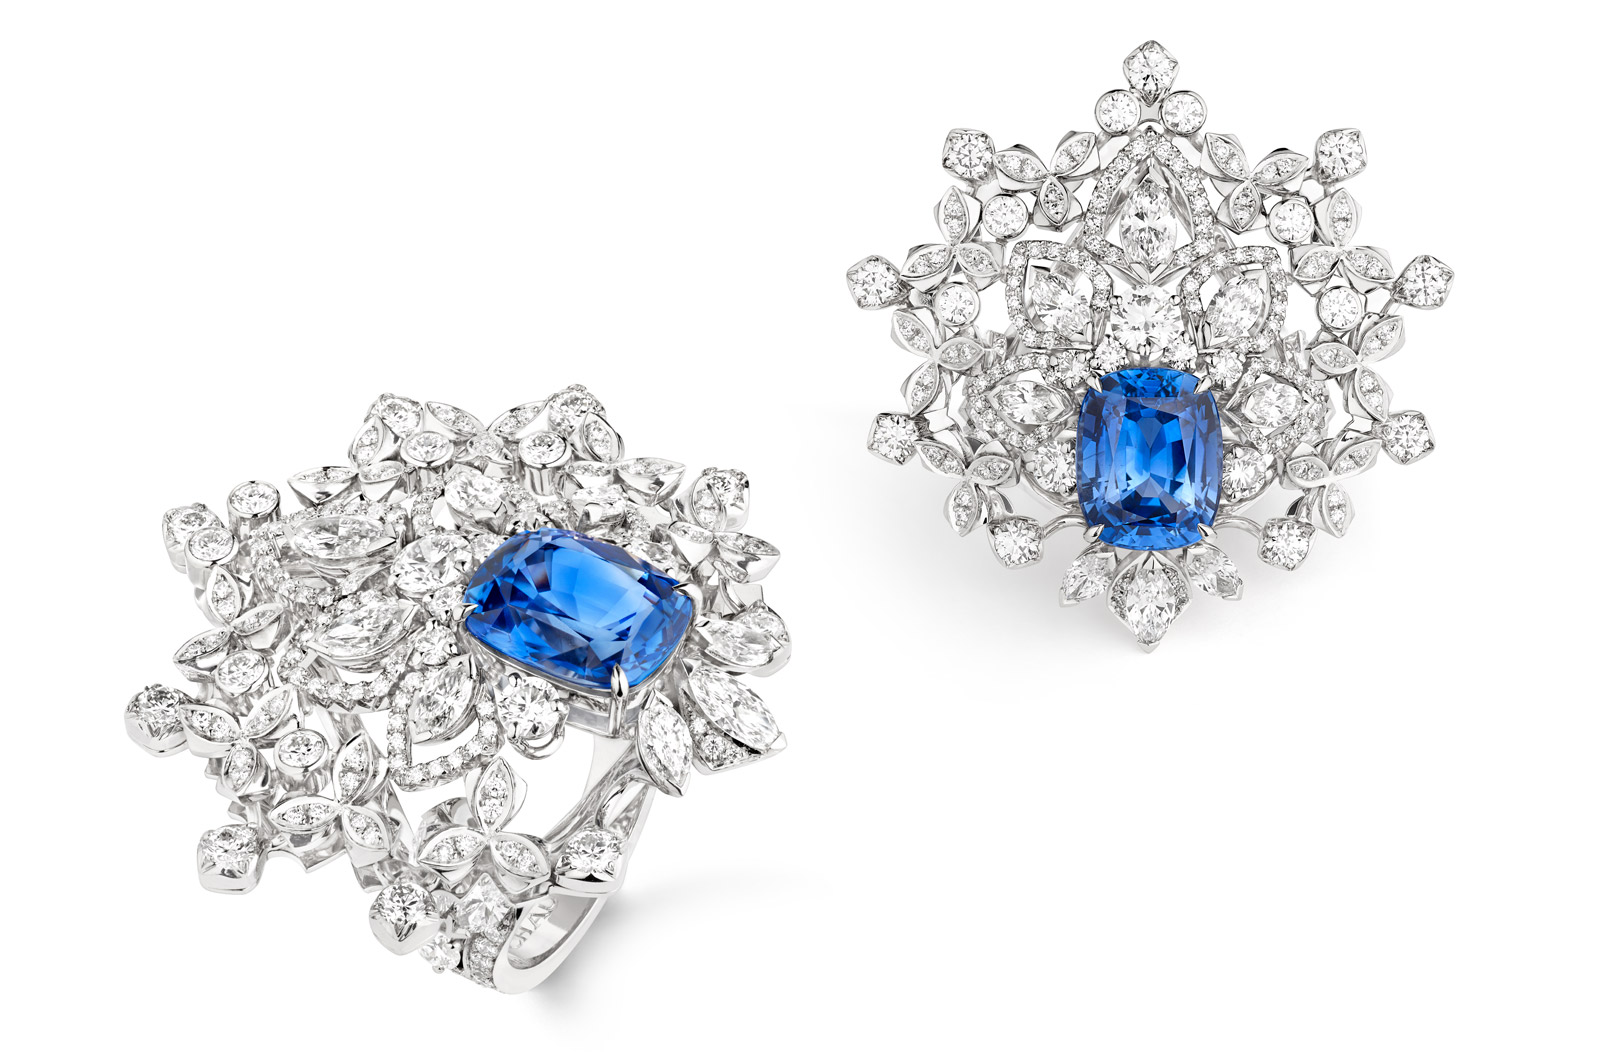 Chaumet 'Promenades Imperiales’ collection ring in 18k white gold, set with a 5.01ct Ceylon sapphire and diamonds